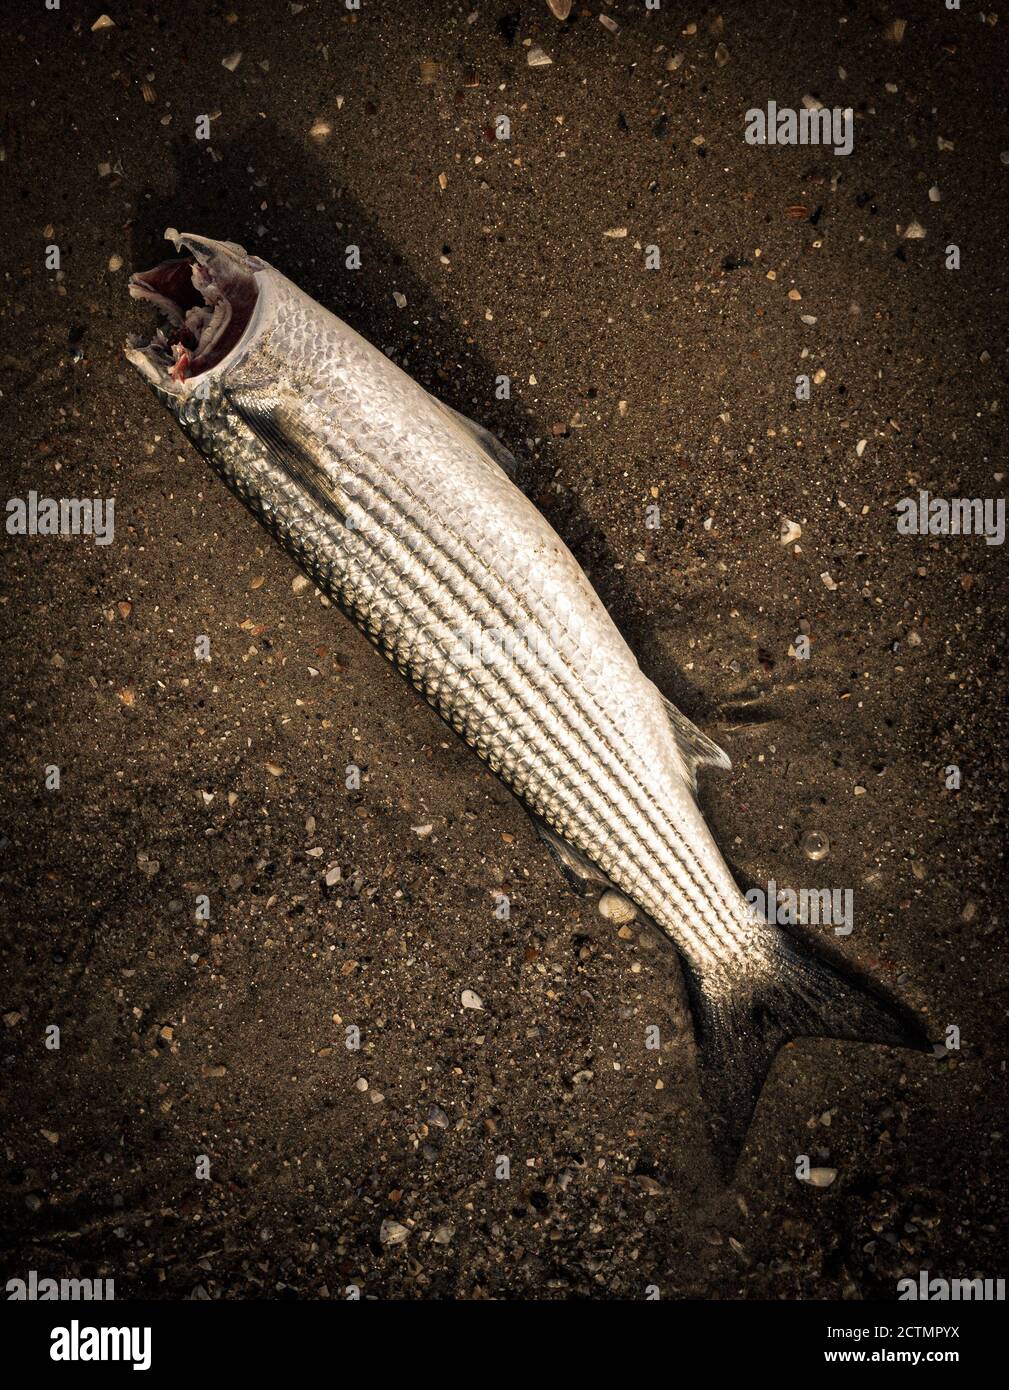 sea fish Mullet without head on beach Stock Photo